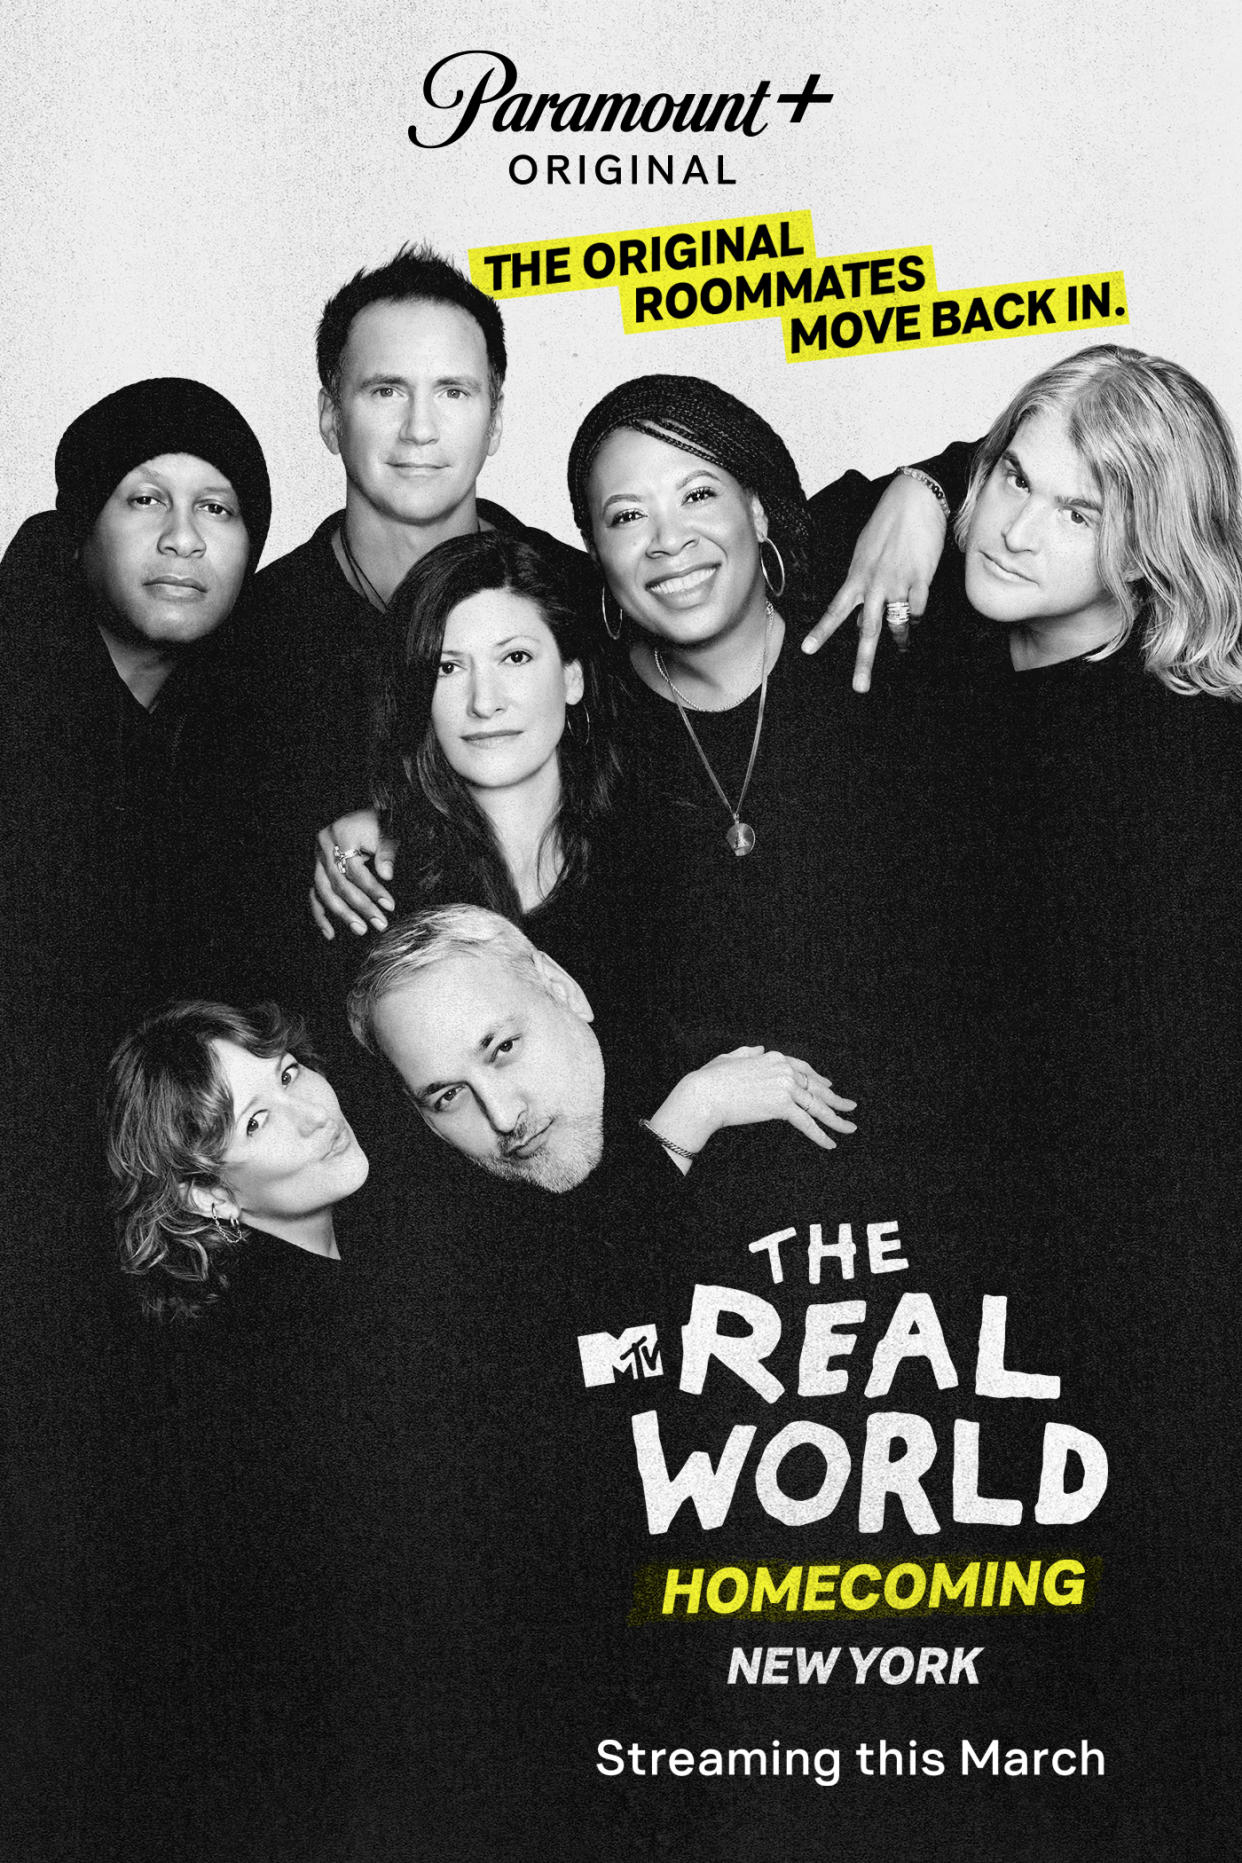 The Real World Season 1 cast, clockwise: Kevin Powell, Eric Nies, Julie Gentry, Heather B. Gardner, Andre Comeau, Norman Korpi, Becky Blasband. (Photo: MTV/Paramount+)